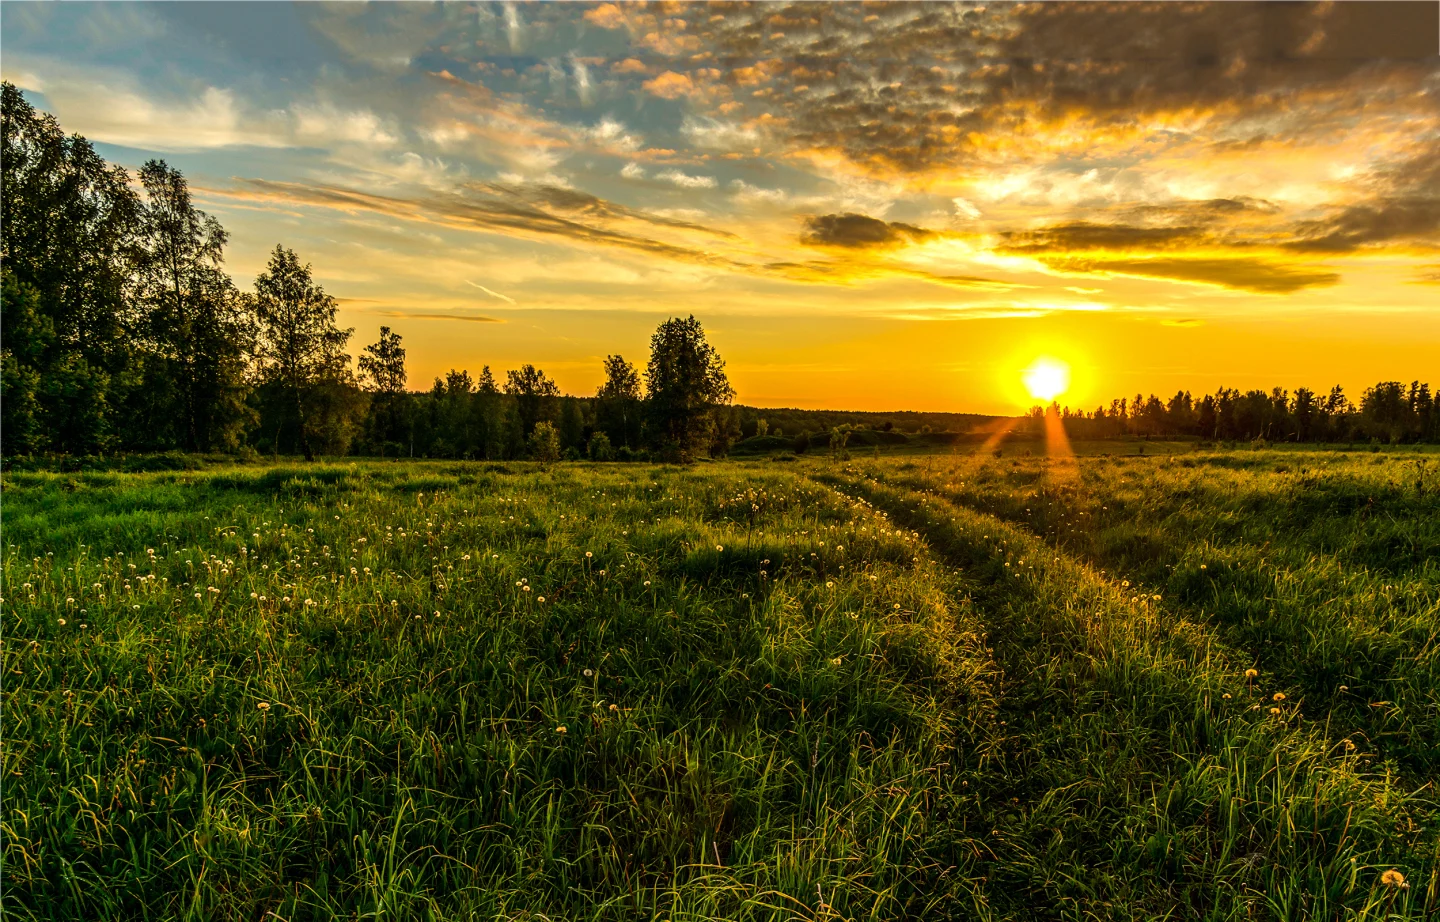 empty-field-at-the-sunset-picture-id689762756